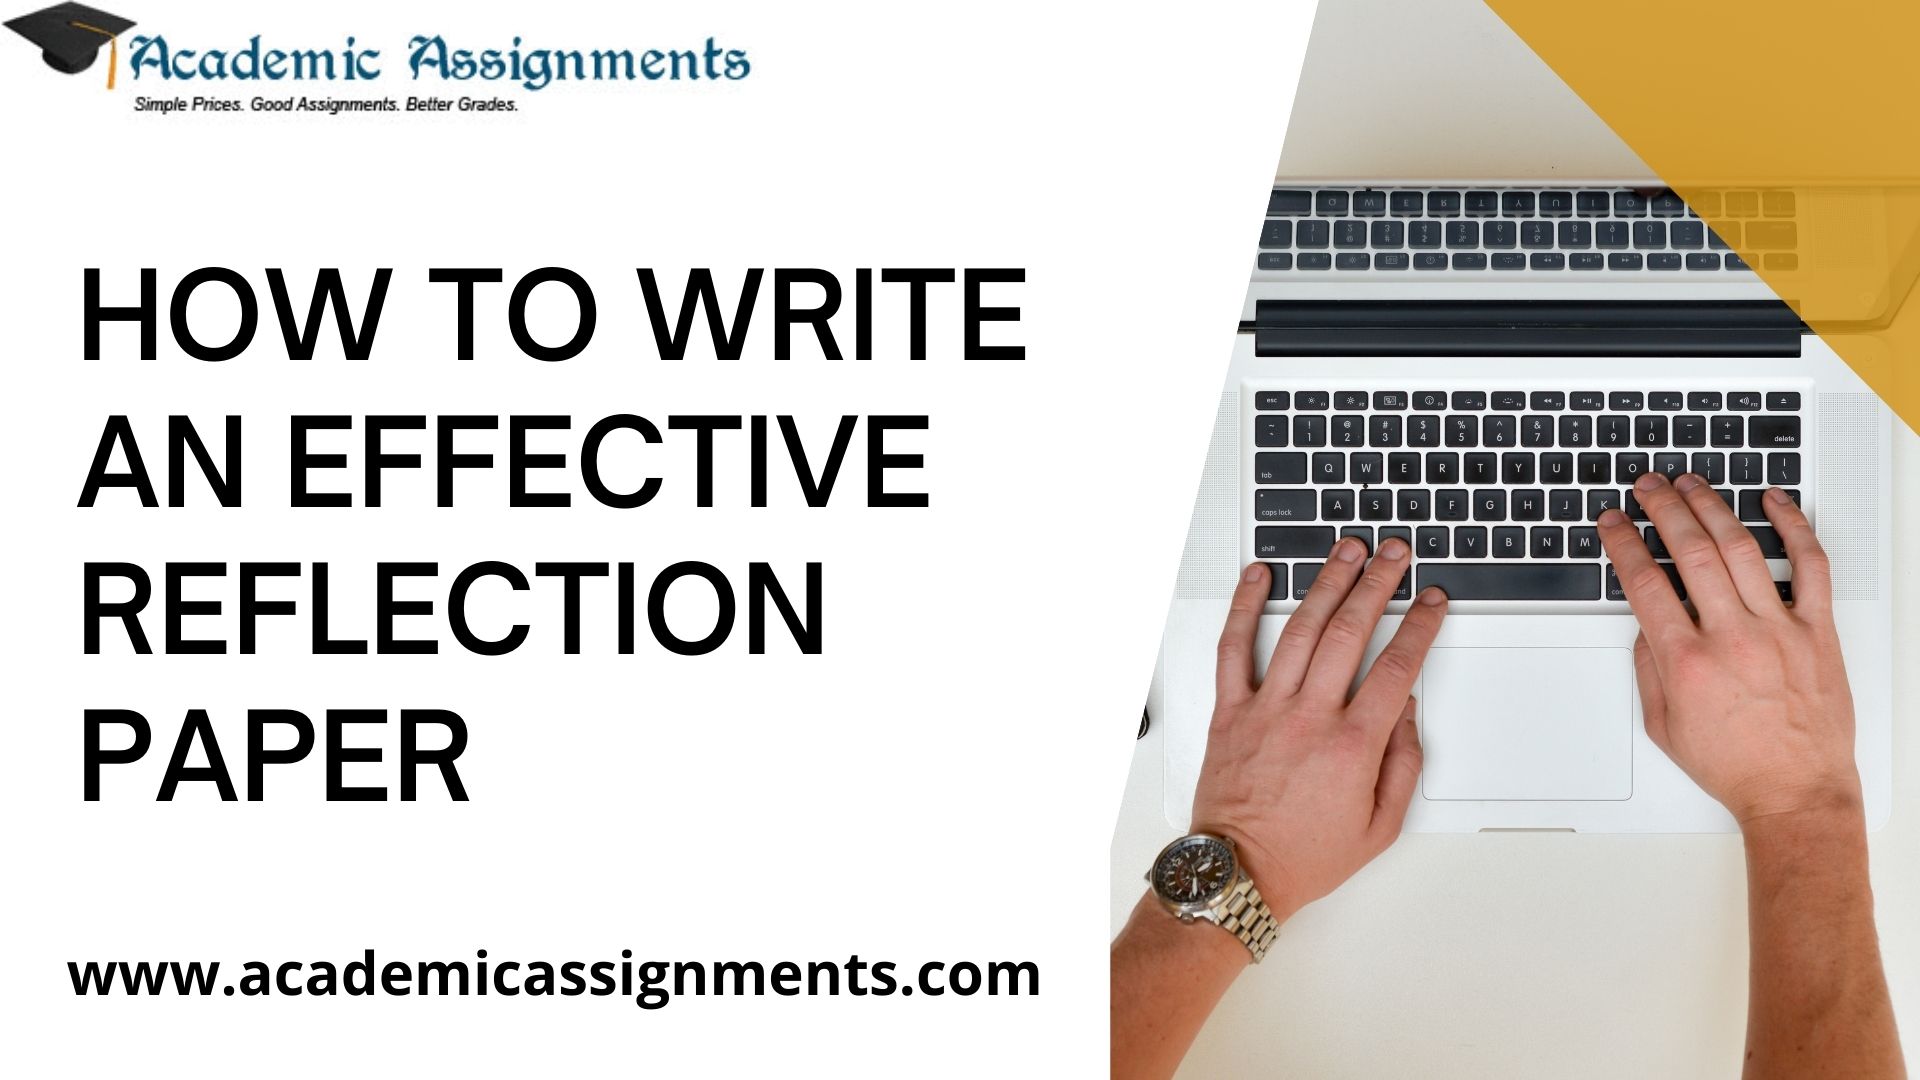 HOW TO WRITE AN EFFECTIVE REFLECTION PAPER